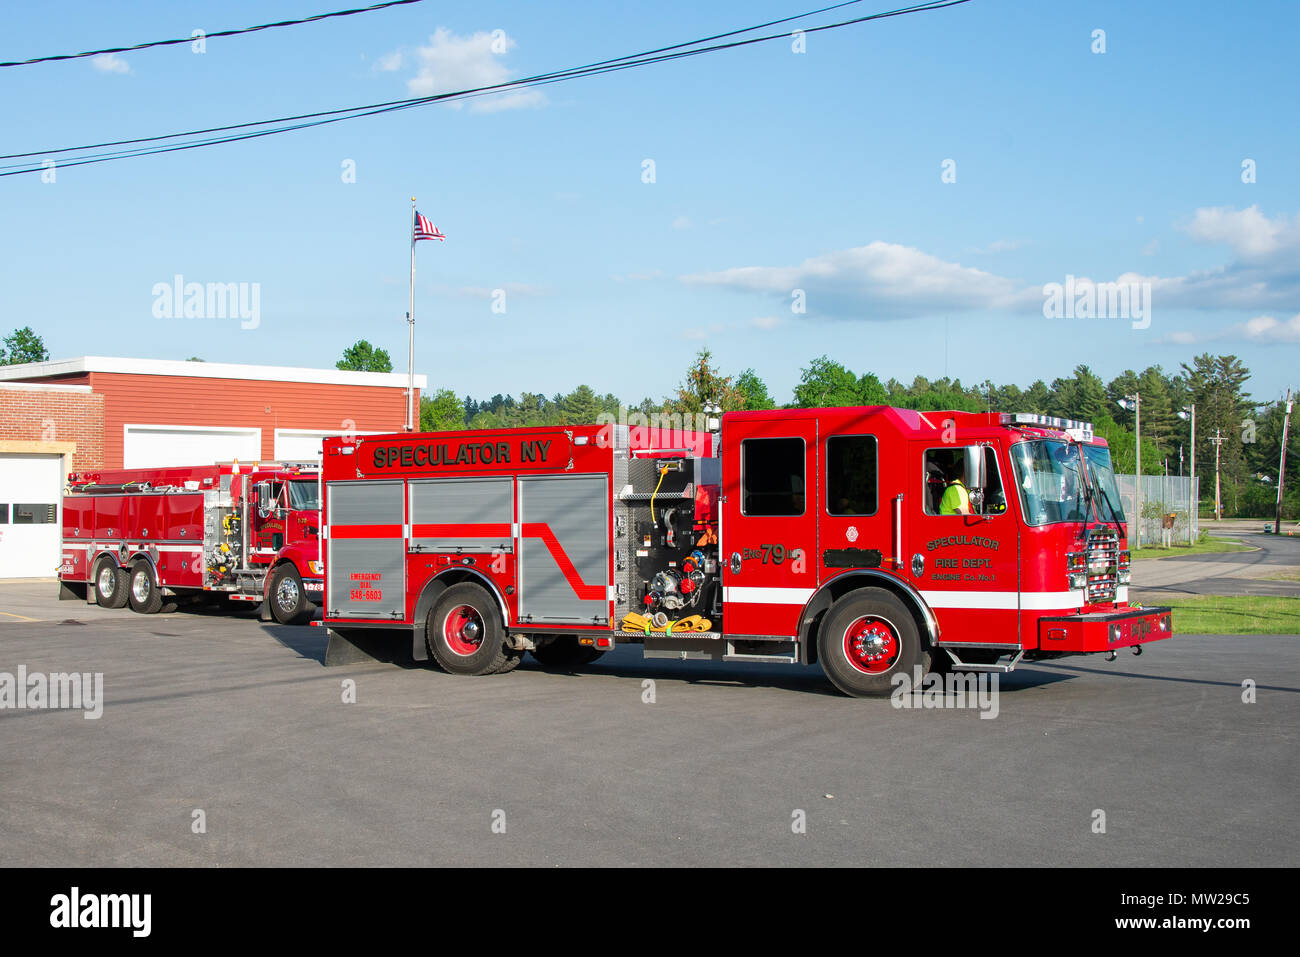 Two fire engines from the Speculator Volunteer Fire Department, in Speculator, NY USA, driving out on a training exercise. Stock Photo